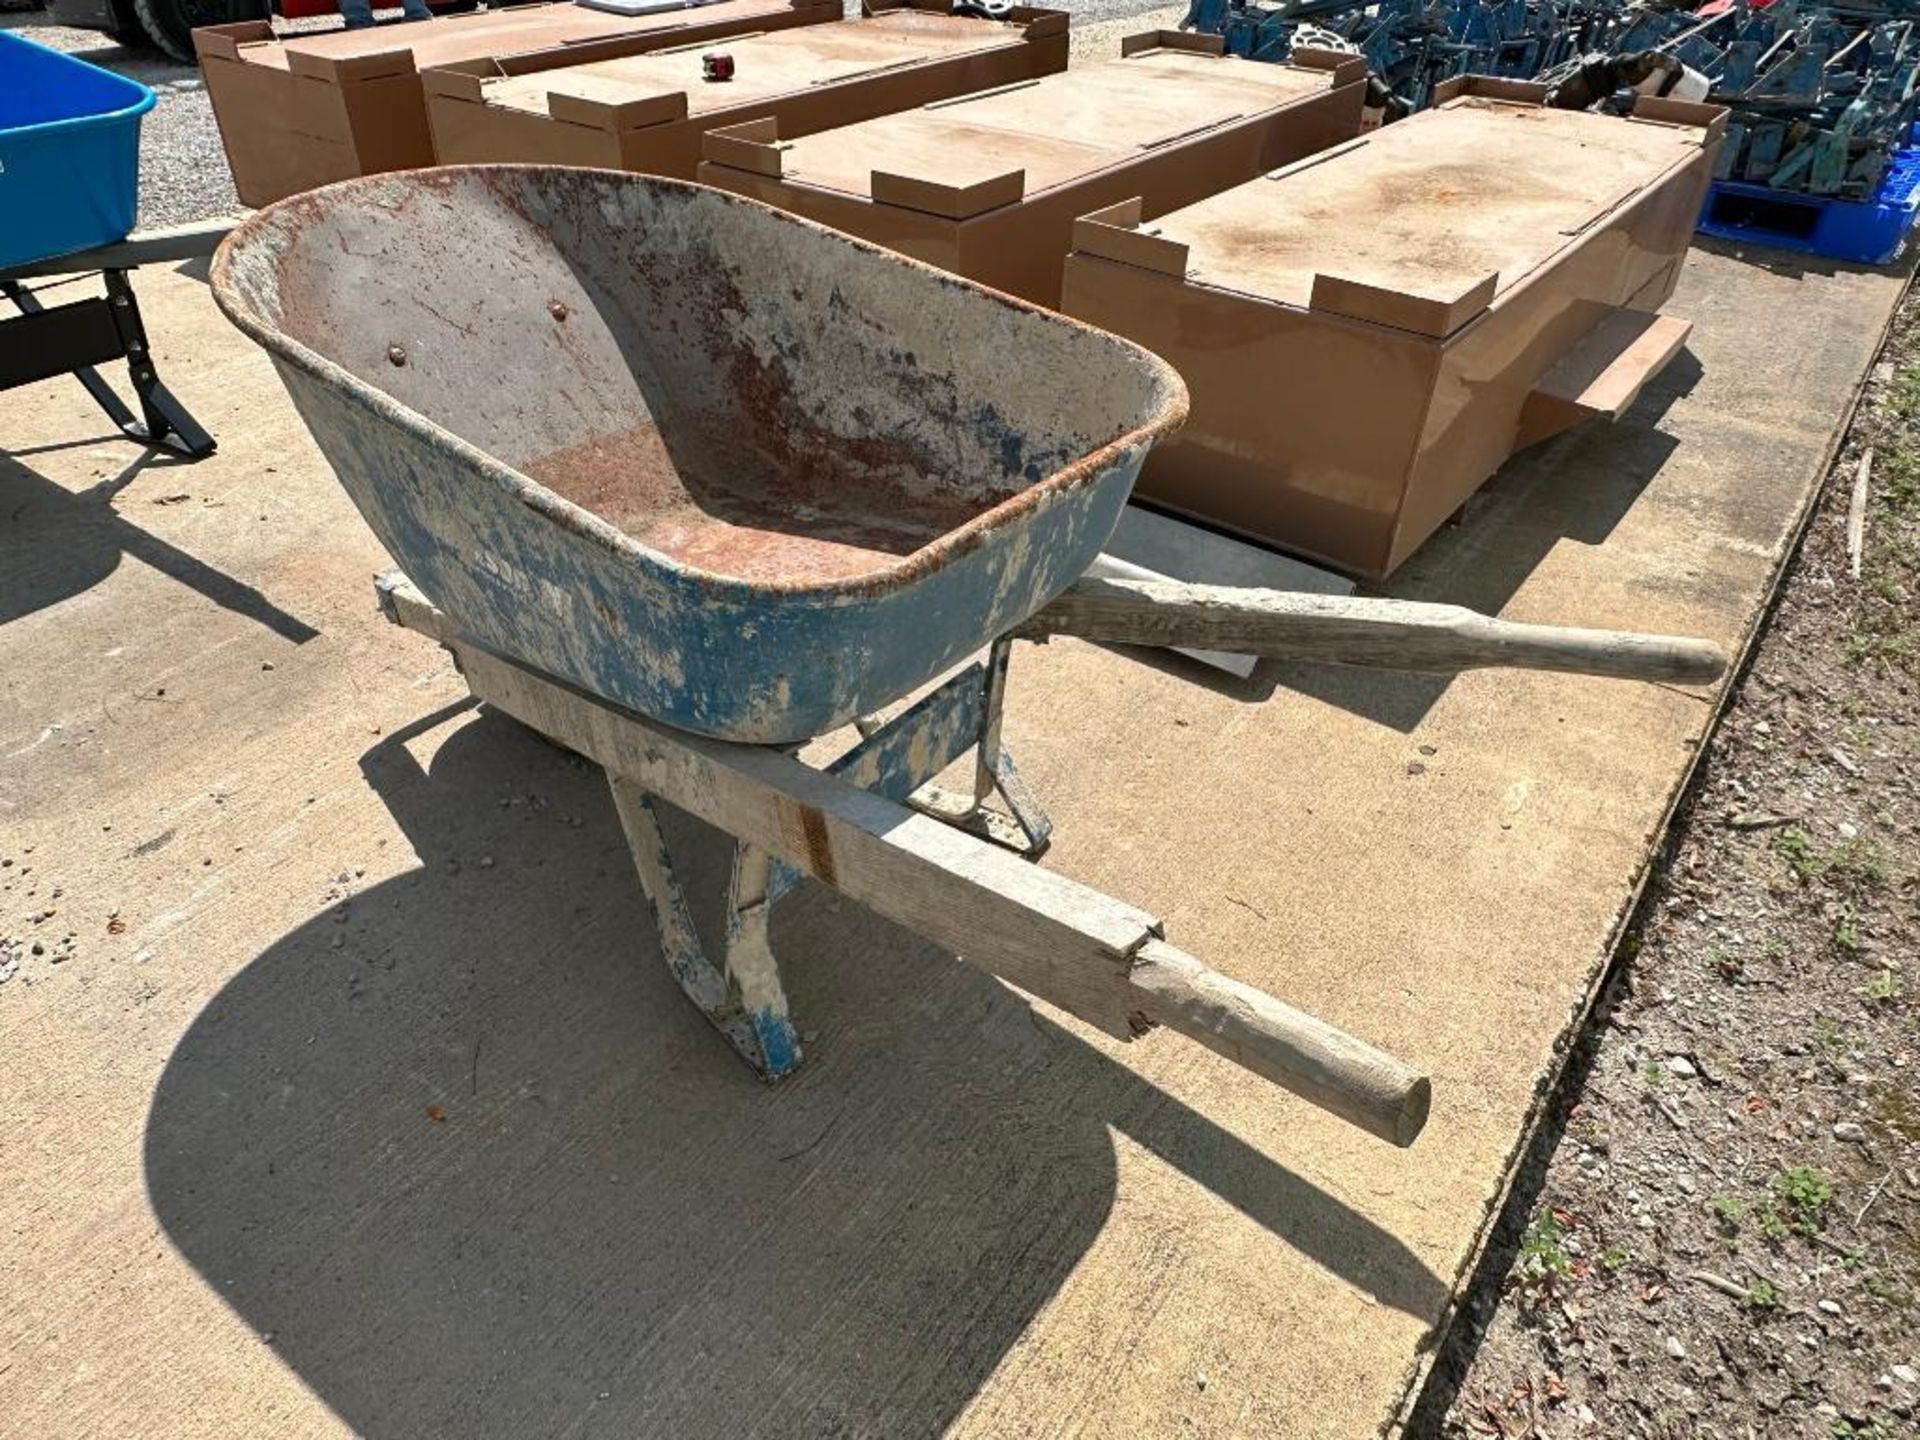 Jackson 6 cubic ft steel wheelbarrow with wood handle, located in Mt. Pleasant, IA. - Image 2 of 3